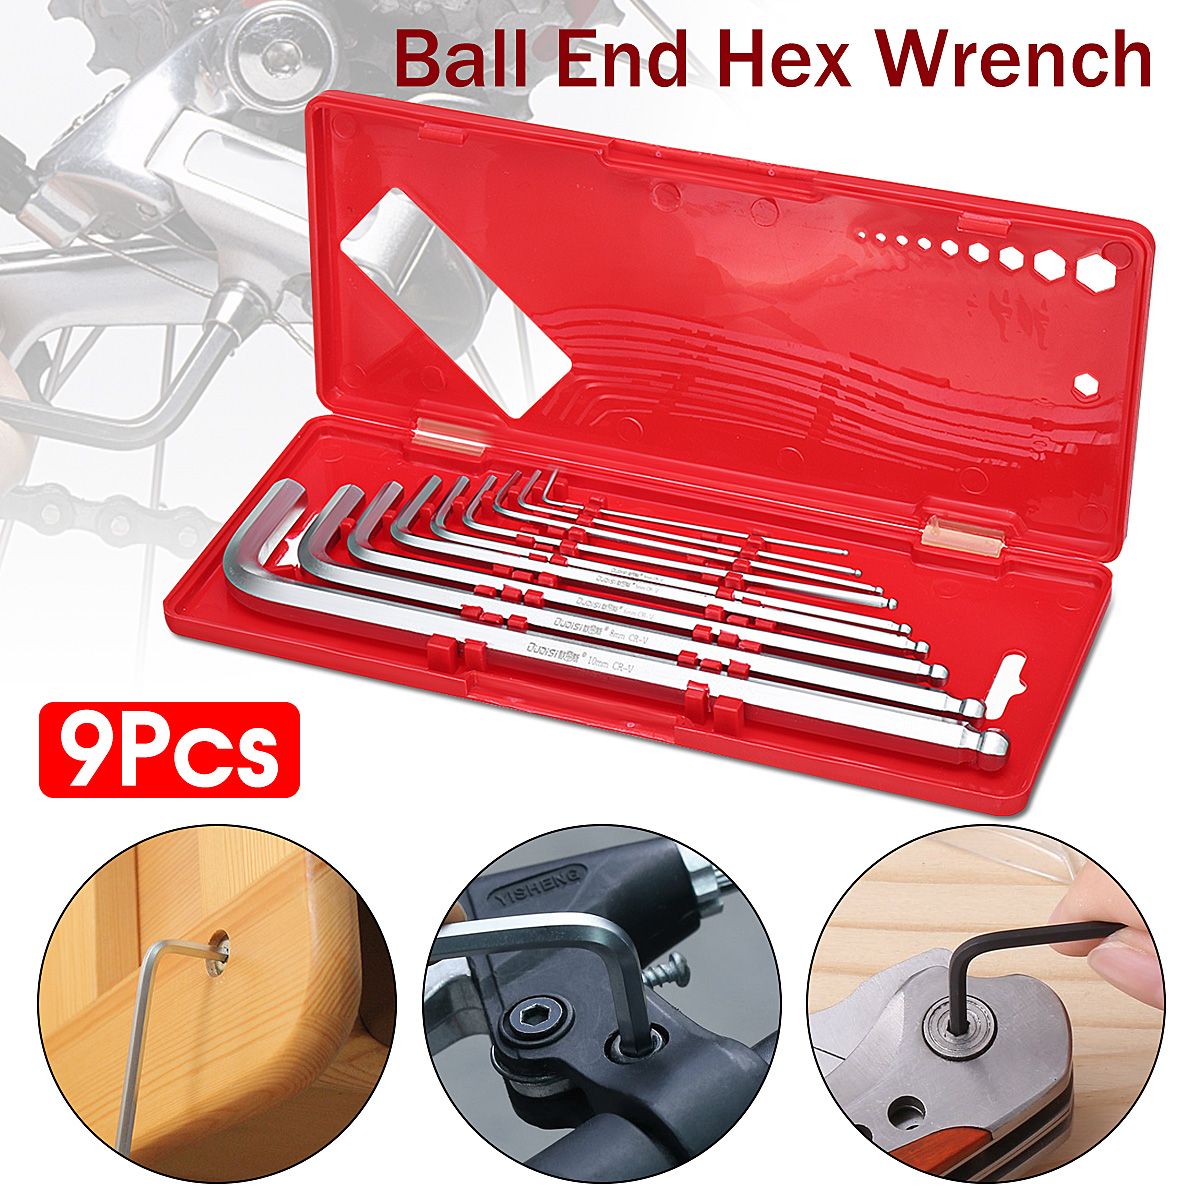 9pcs-Ball-Point-End-Hex-Allen-Allan-Wrench-Key-Hand-Tools-Kits-Accessories-15-10mm-with-Box-1260527